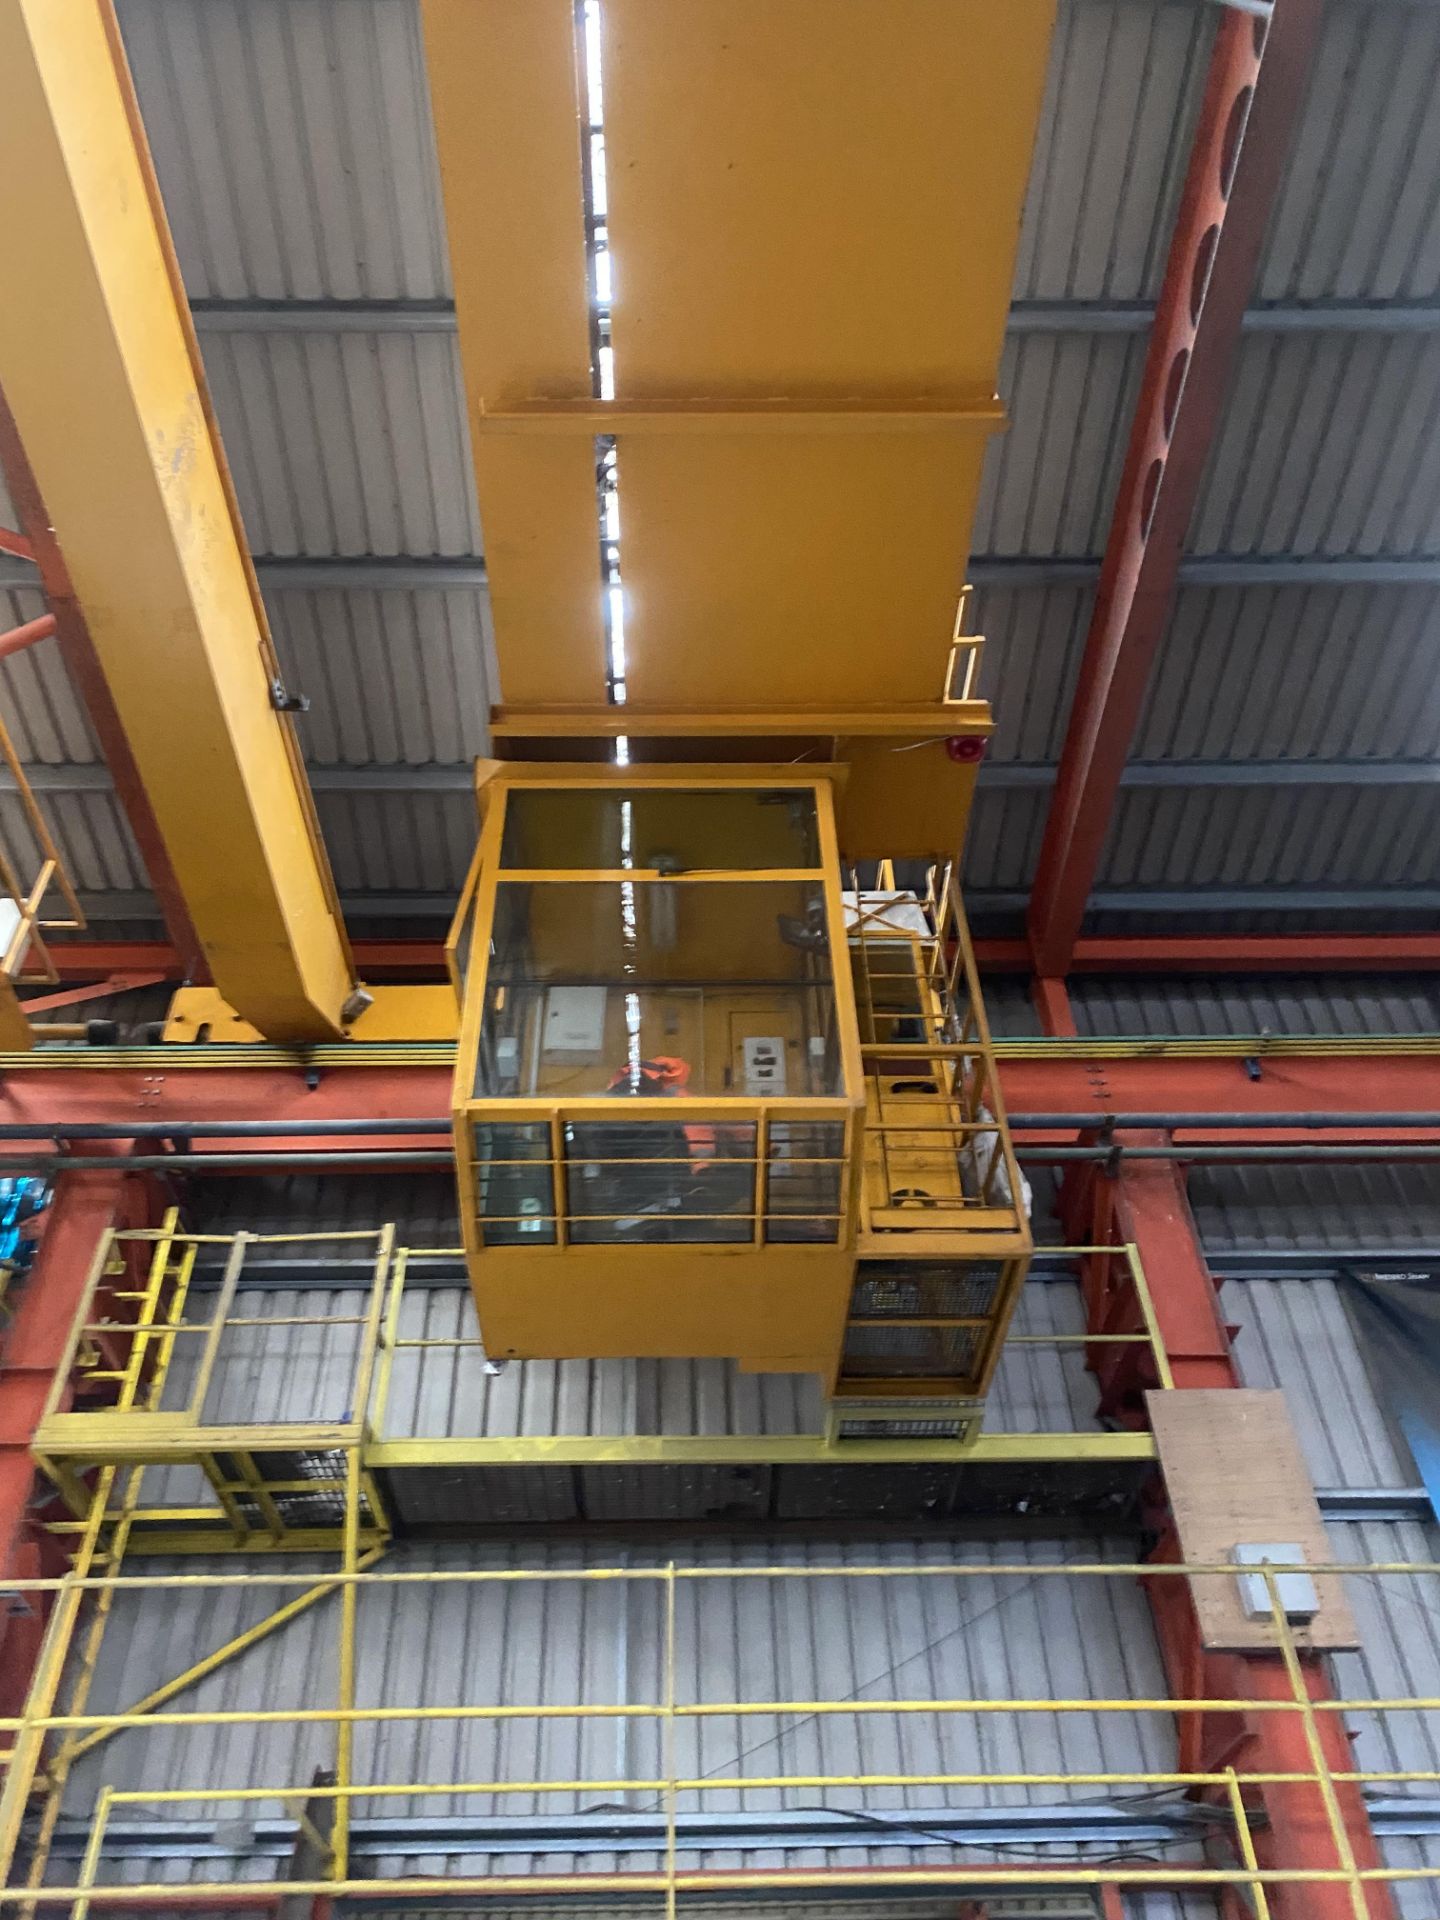 Demag 15T + 15T SWL TWIN GIRDER TRAVELLING OVERHEAD CRANE, serial no. 489487 03 approx. 19m span ( - Image 5 of 5